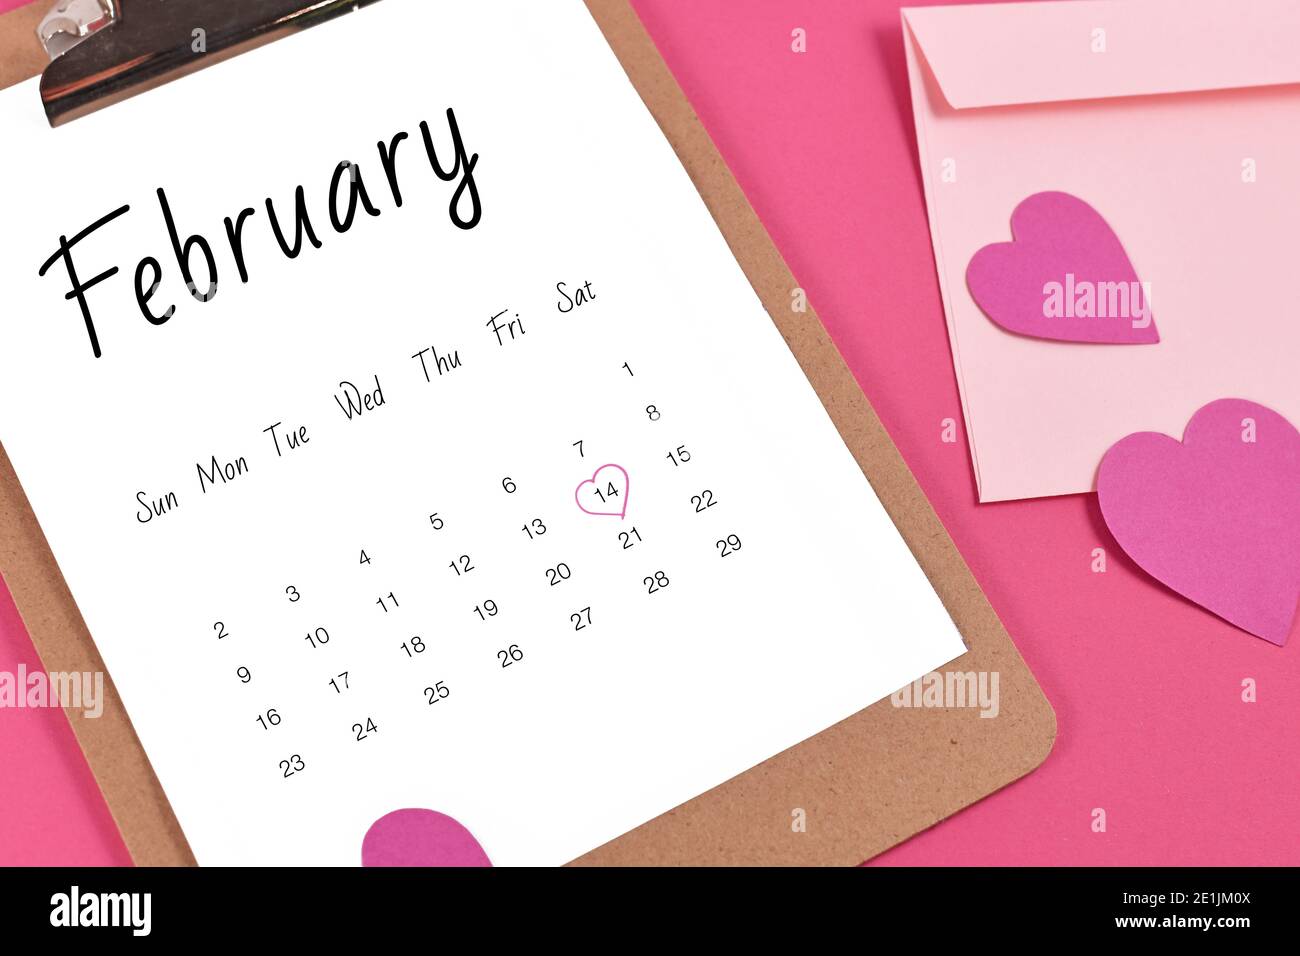 February calendar sheet with Valentine's Day on the 14th marked with heart surrounded by hearts and love letter on pink background Stock Photo